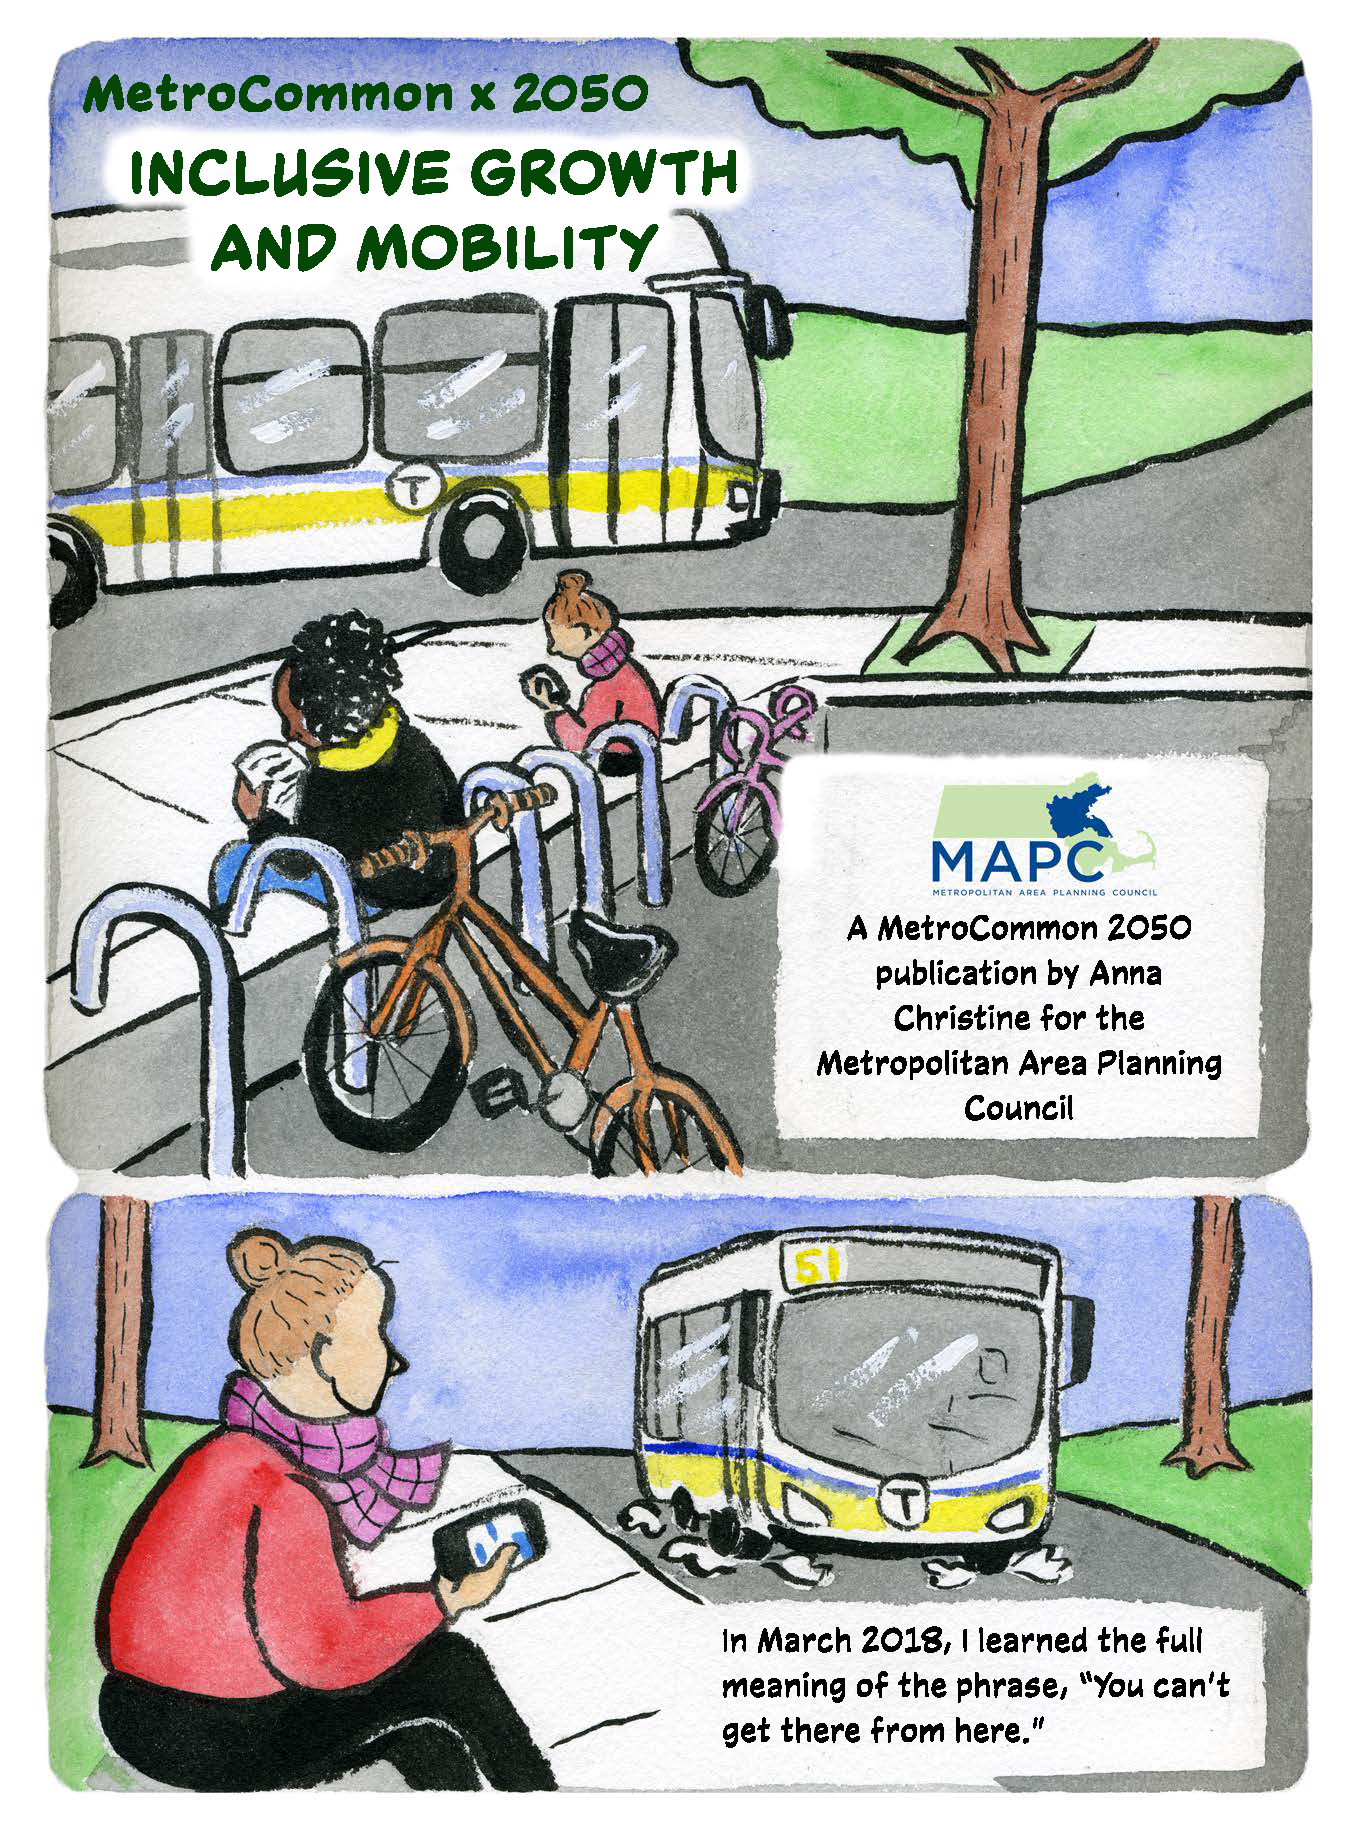 Illustration: People wait for bus in front of bike biking. Text: MetroCommon 2050: Inclusive Growth and Mobility. A MetroCommon 2050 publication by Anna Christine for the Metropolitan Area Planning Council. In March 2018, I learned the full meaning of the phrase "You can't get there from here."